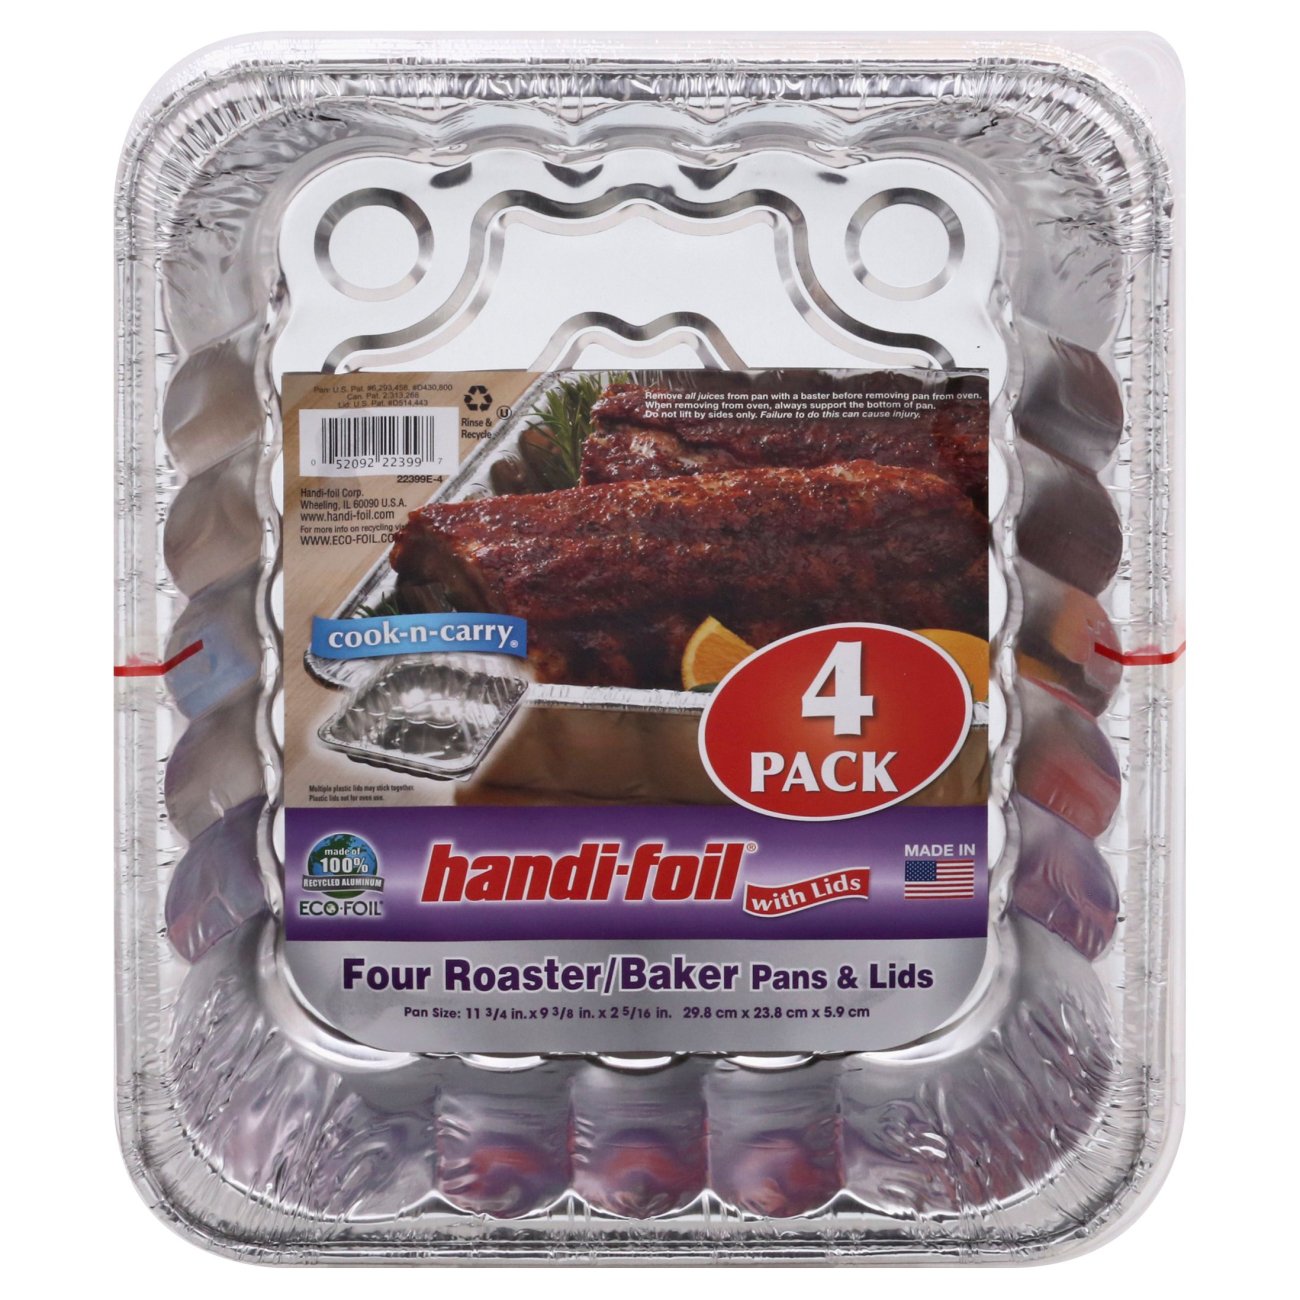 Foil BBQ and Oven Bag 8.75 x 11.75 